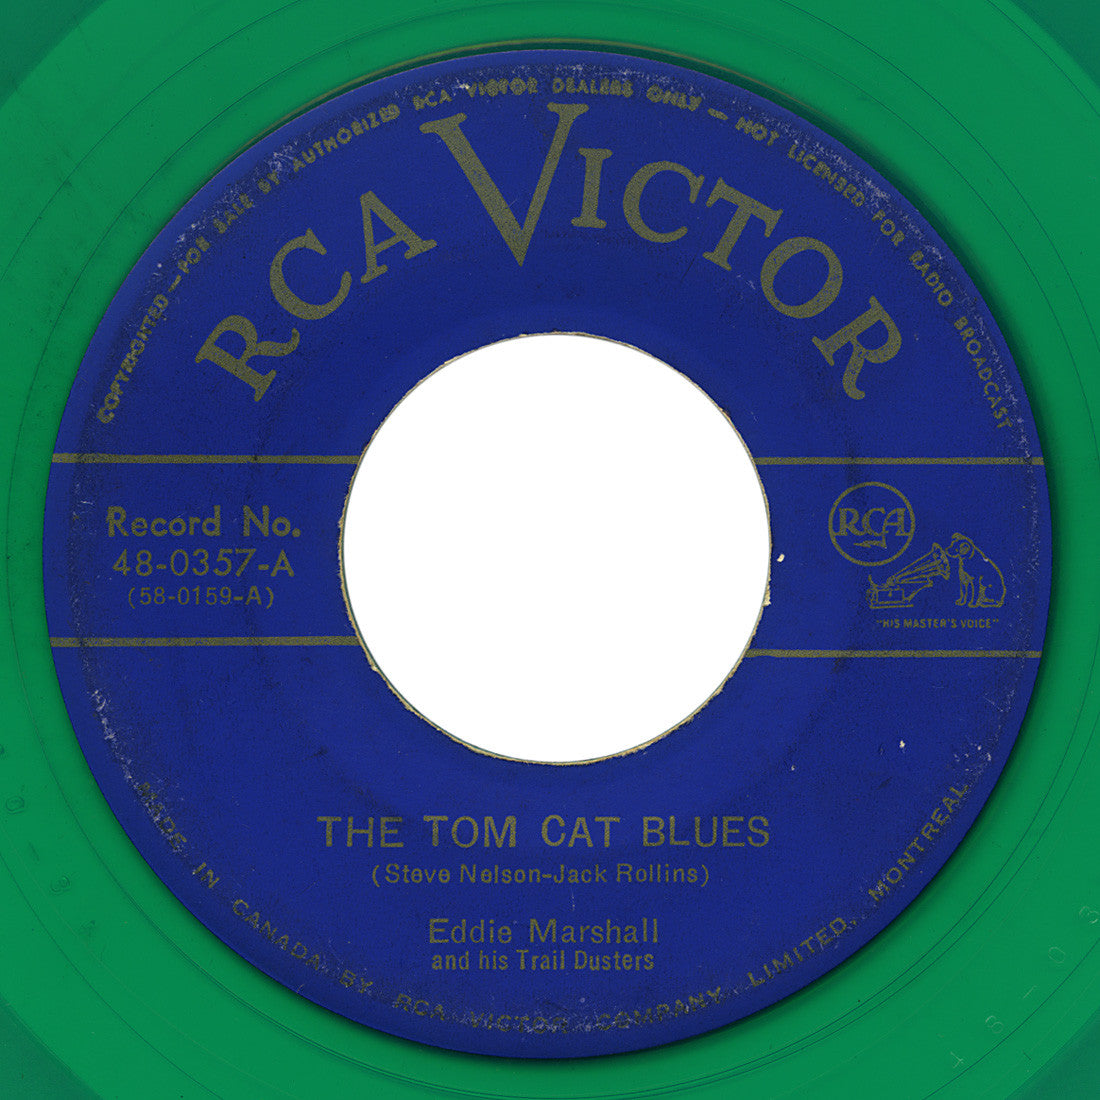 Eddie Marshall and his Trail Dusters – Tom Cat Blues – RCA Victor